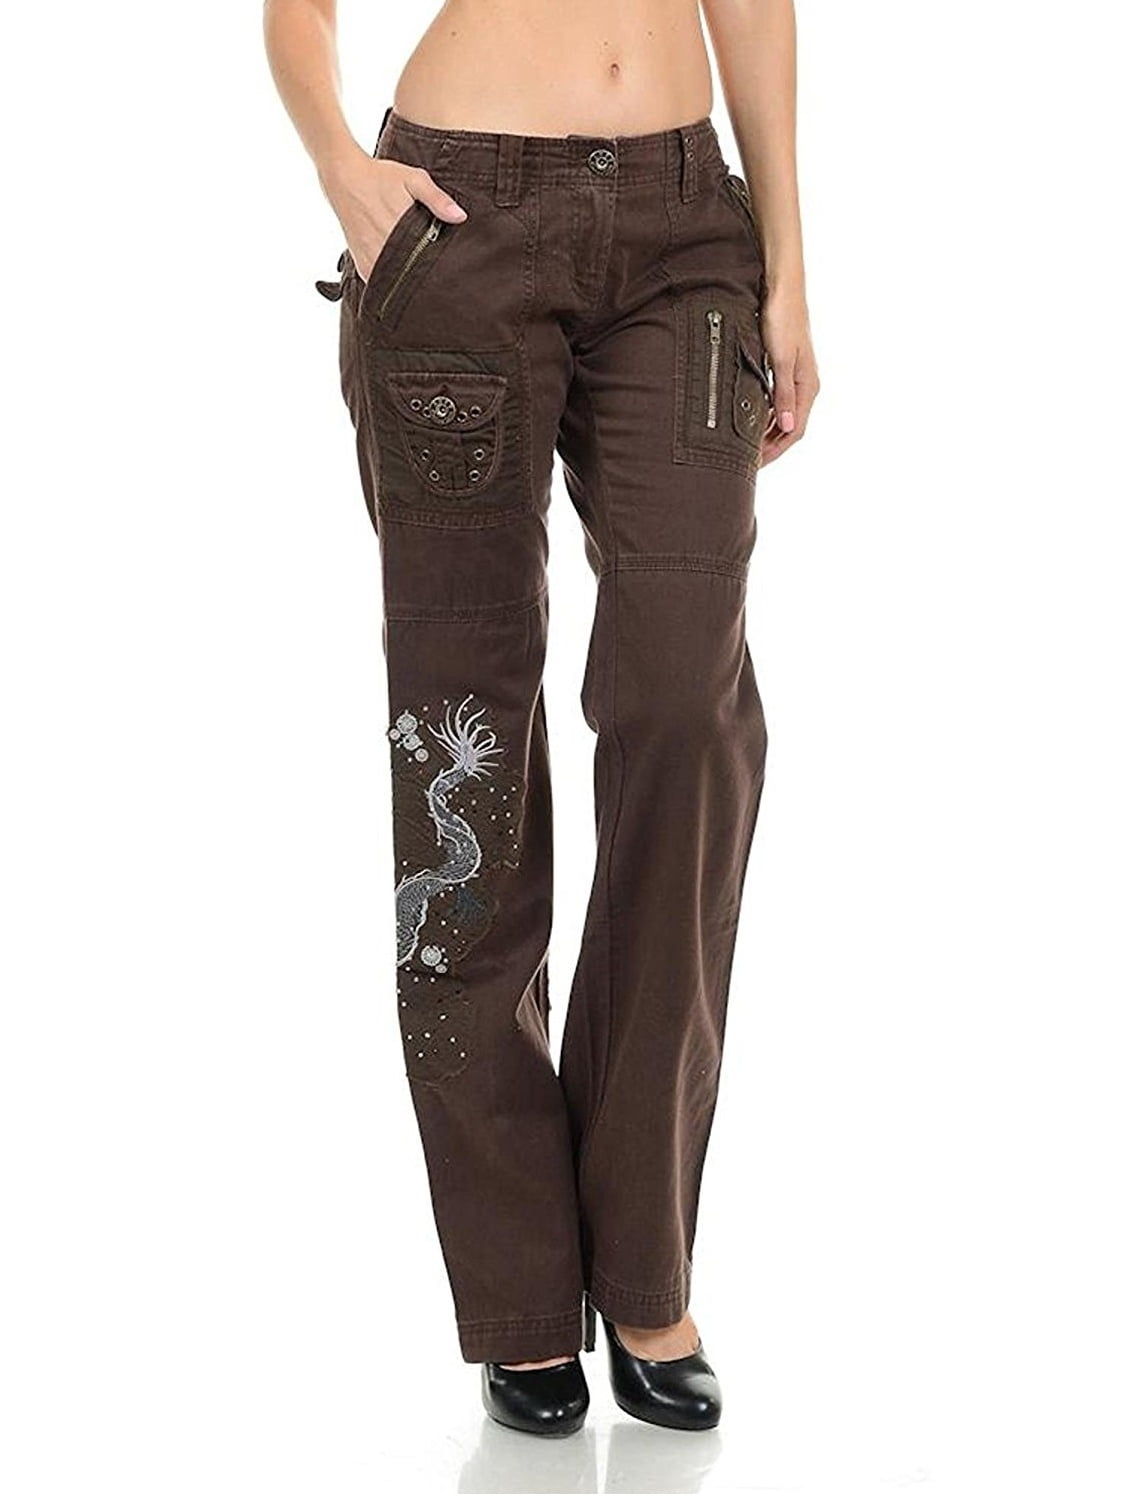 hipster cargo pants